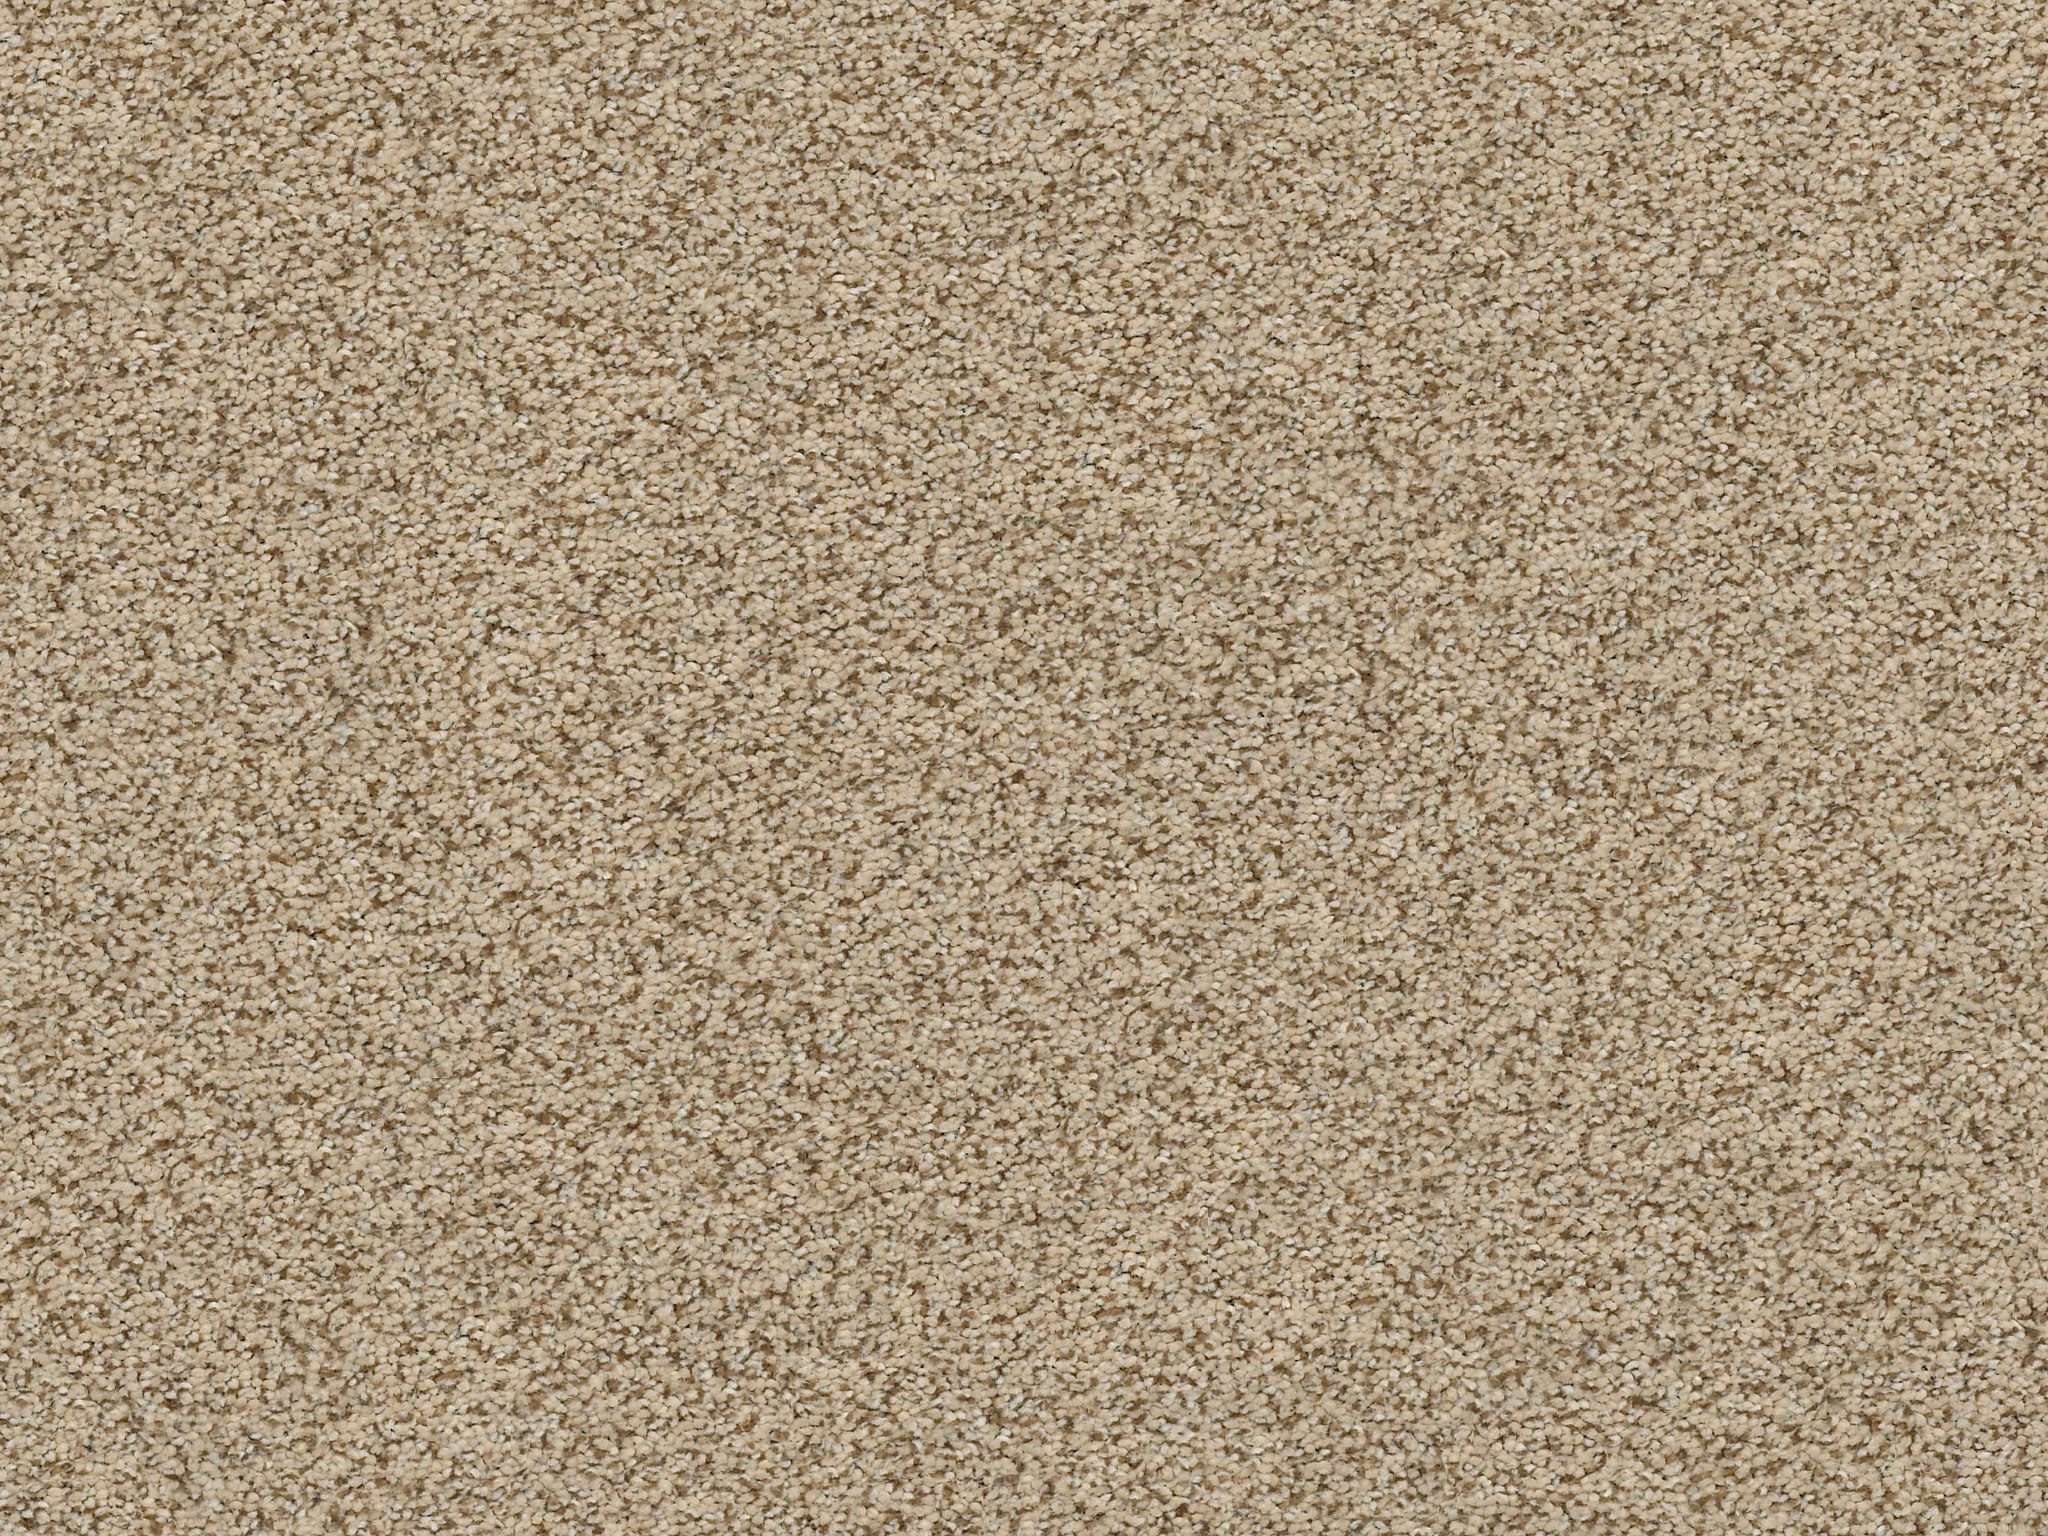 Serenity Cove Carpet - Sugar Cookie Zoomed Swatch Image